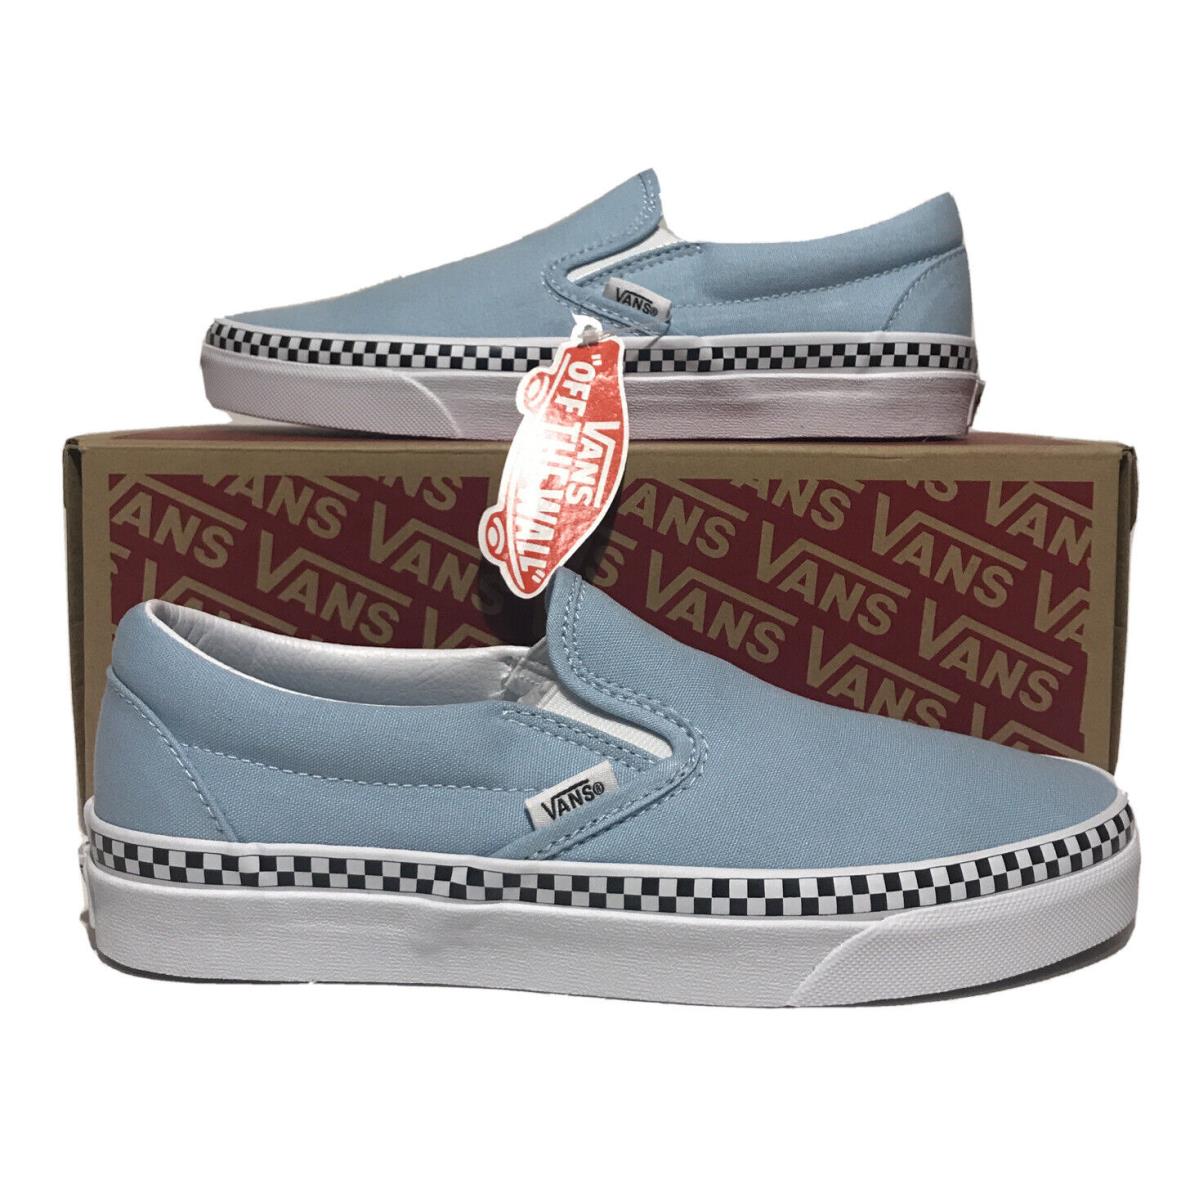 Vans Slip On Womens Size 7.5 Cool Blue Checker Casual Shoes Check Foxing